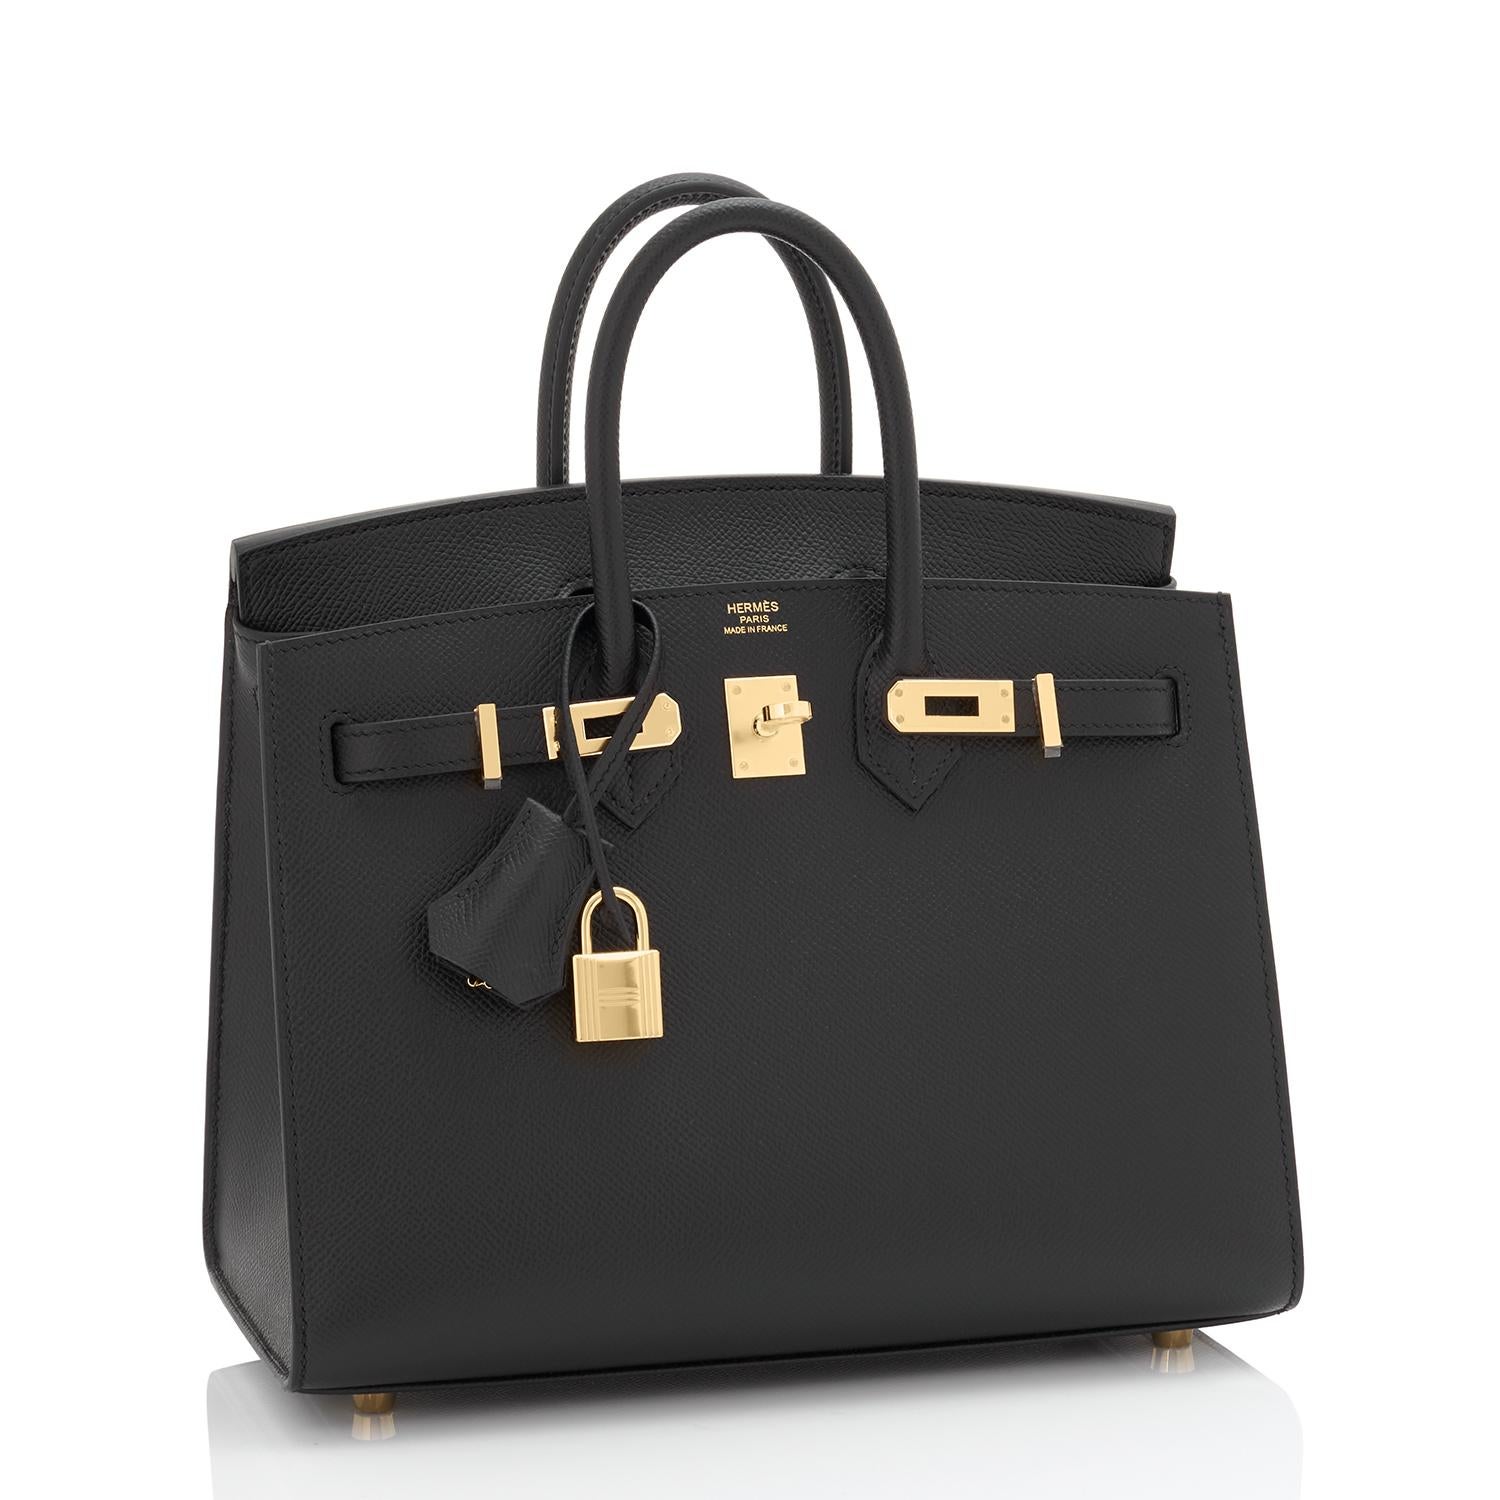 Hermes Birkin 25 Sellier Black Veau Madame Gold Hardware Y Stamp, 2020 RARE
BANK WIRE PRICE ONLY
Brand New in Box. Store Fresh. Pristine Condition (with plastic on hardware) 
Perfect gift! Comes in full set with clochette, lock, keys, raincoat, dust